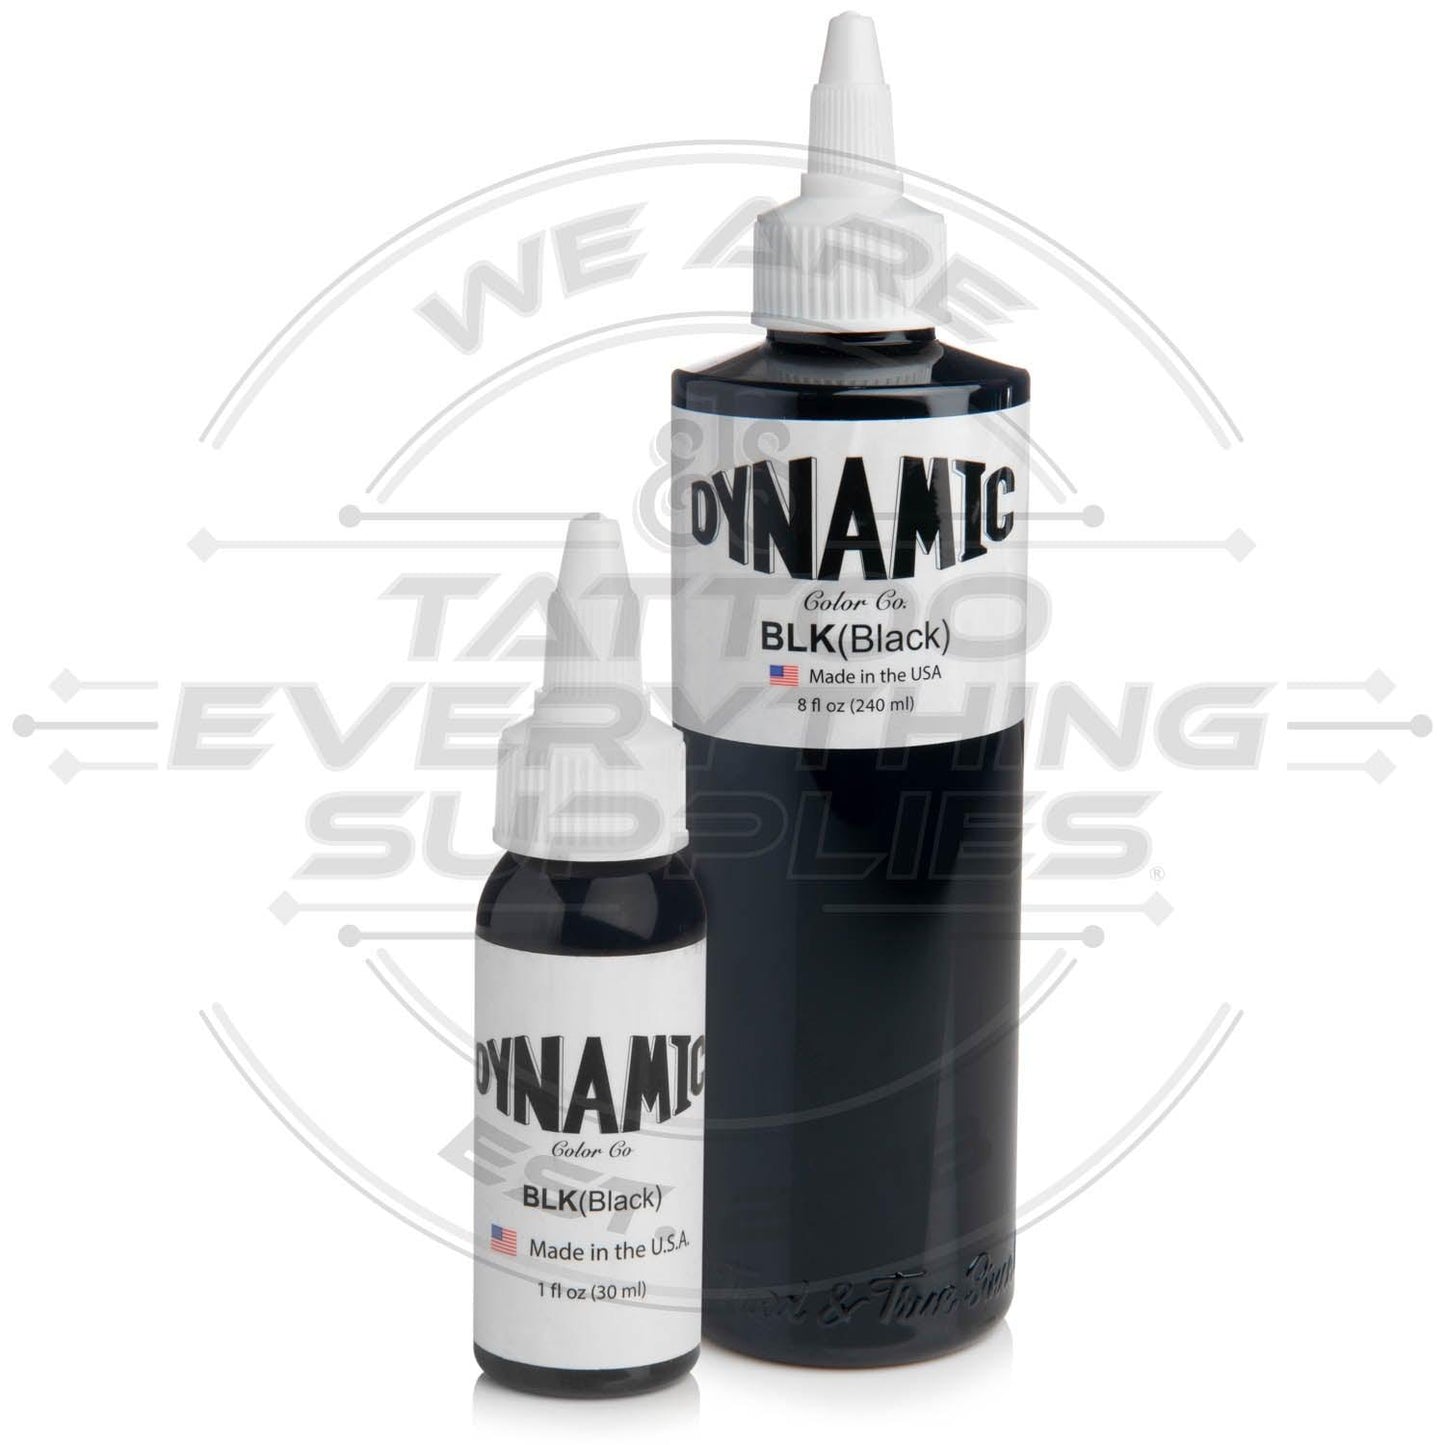 Dynamic Ink Black Tattoo Ink - Tattoo Everything Supplies